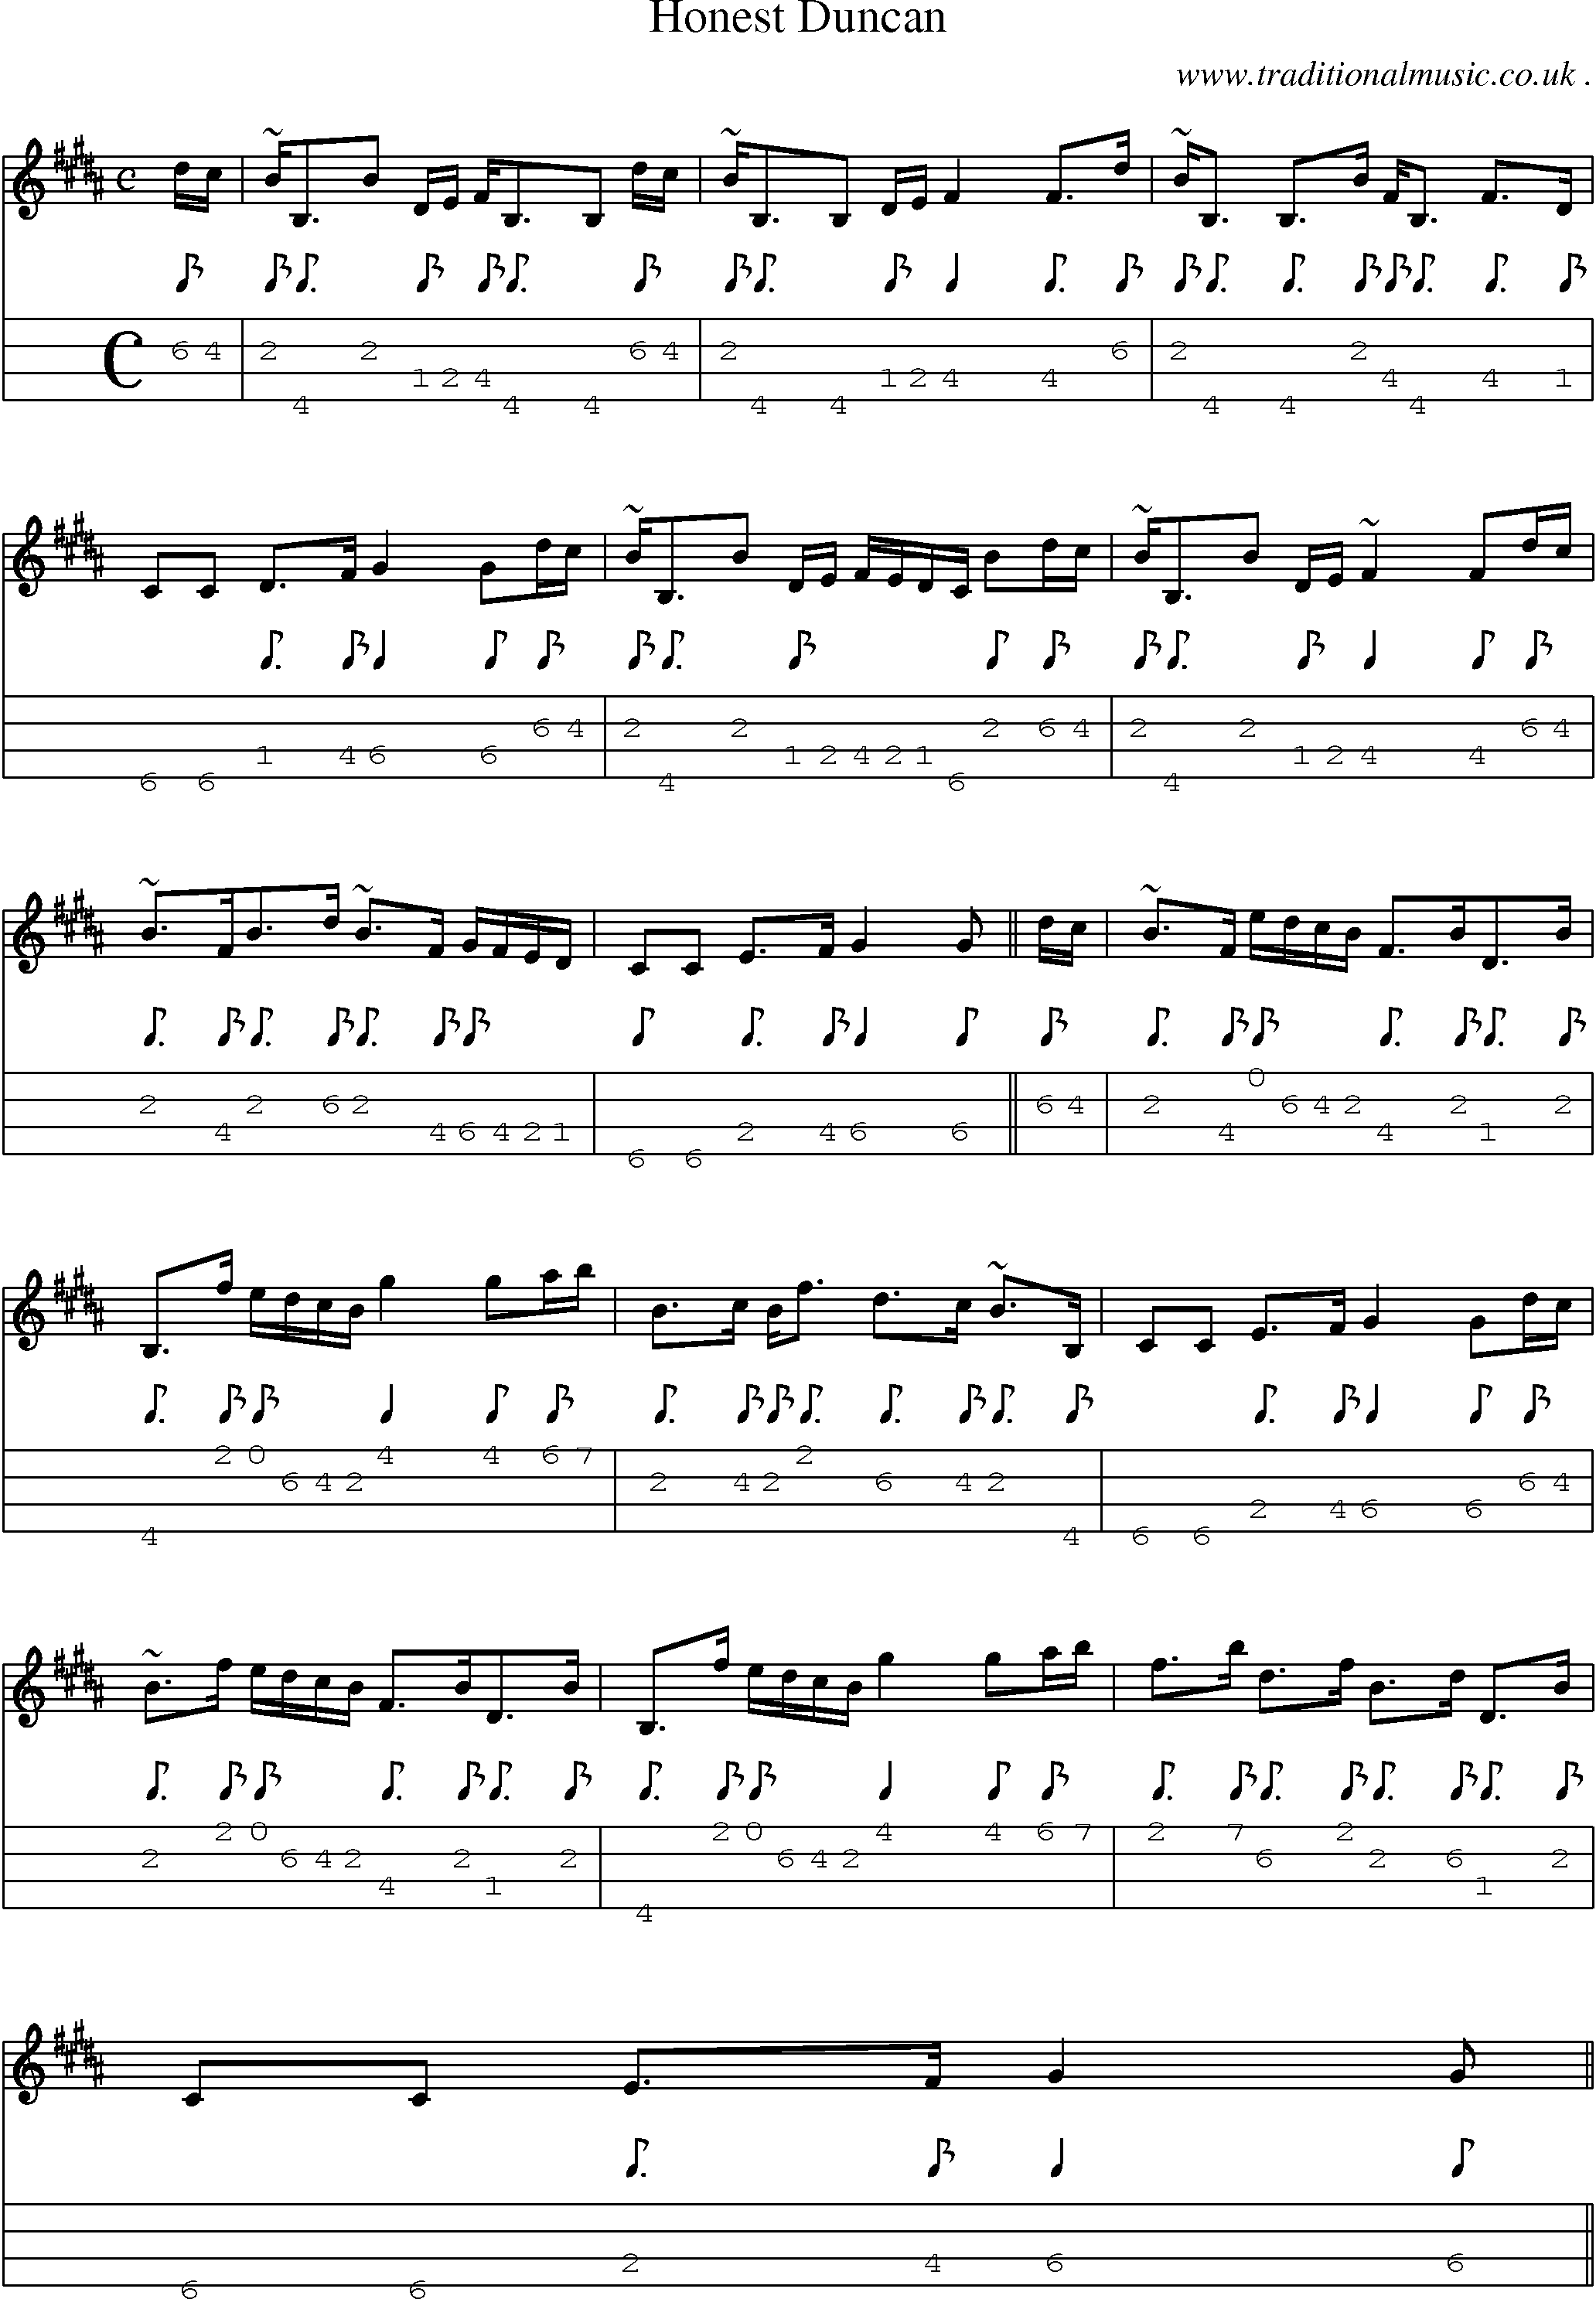 Sheet-music  score, Chords and Mandolin Tabs for Honest Duncan